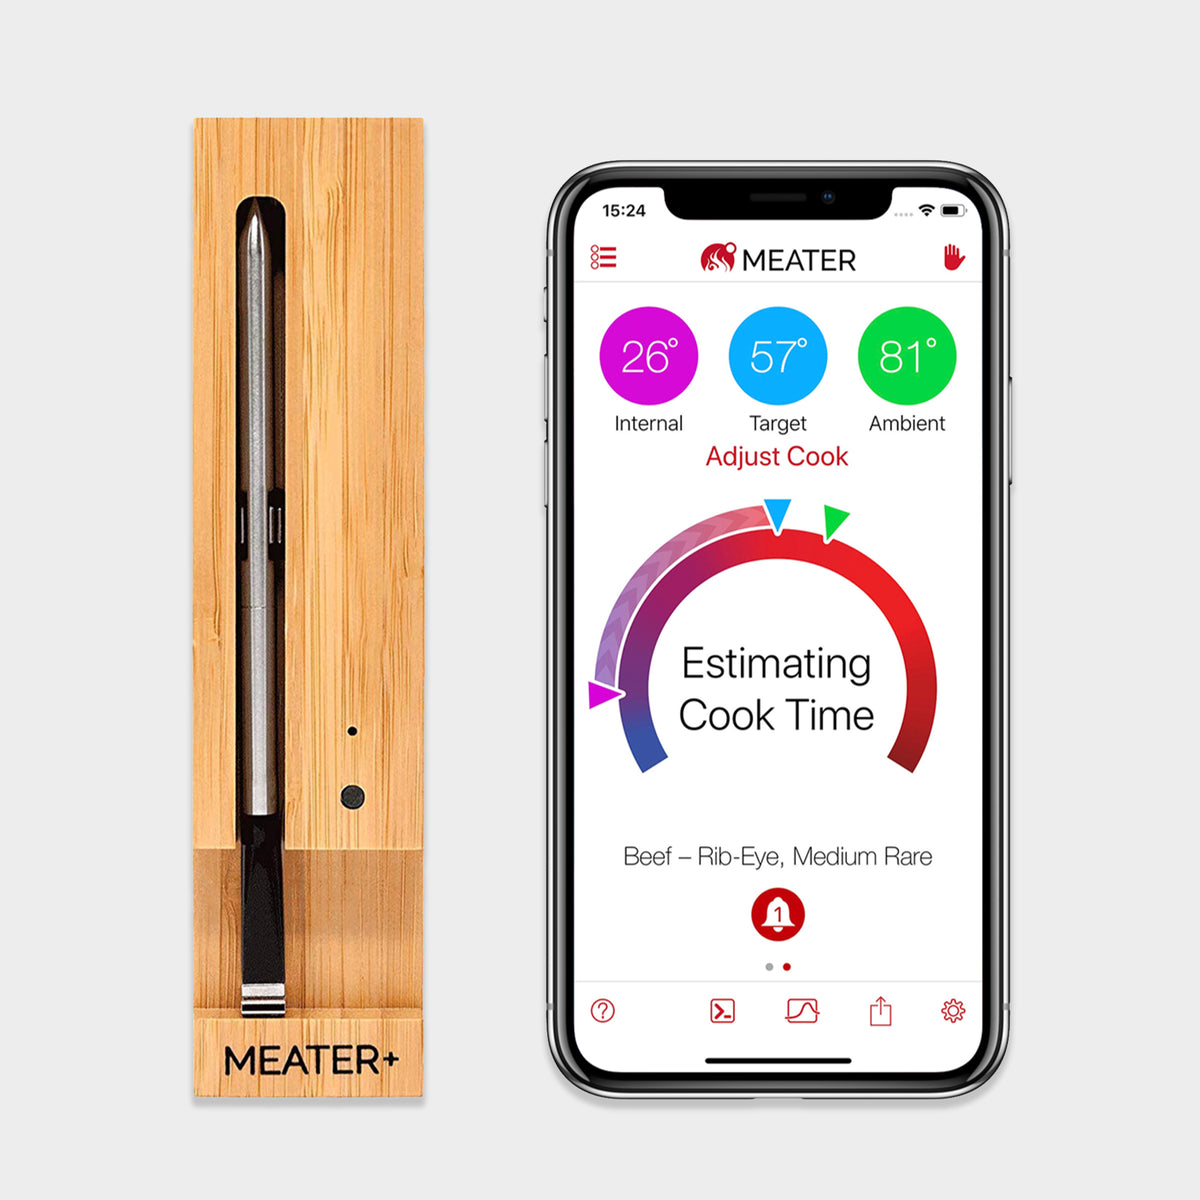 Meater® Plus Wireless Meat Thermometer